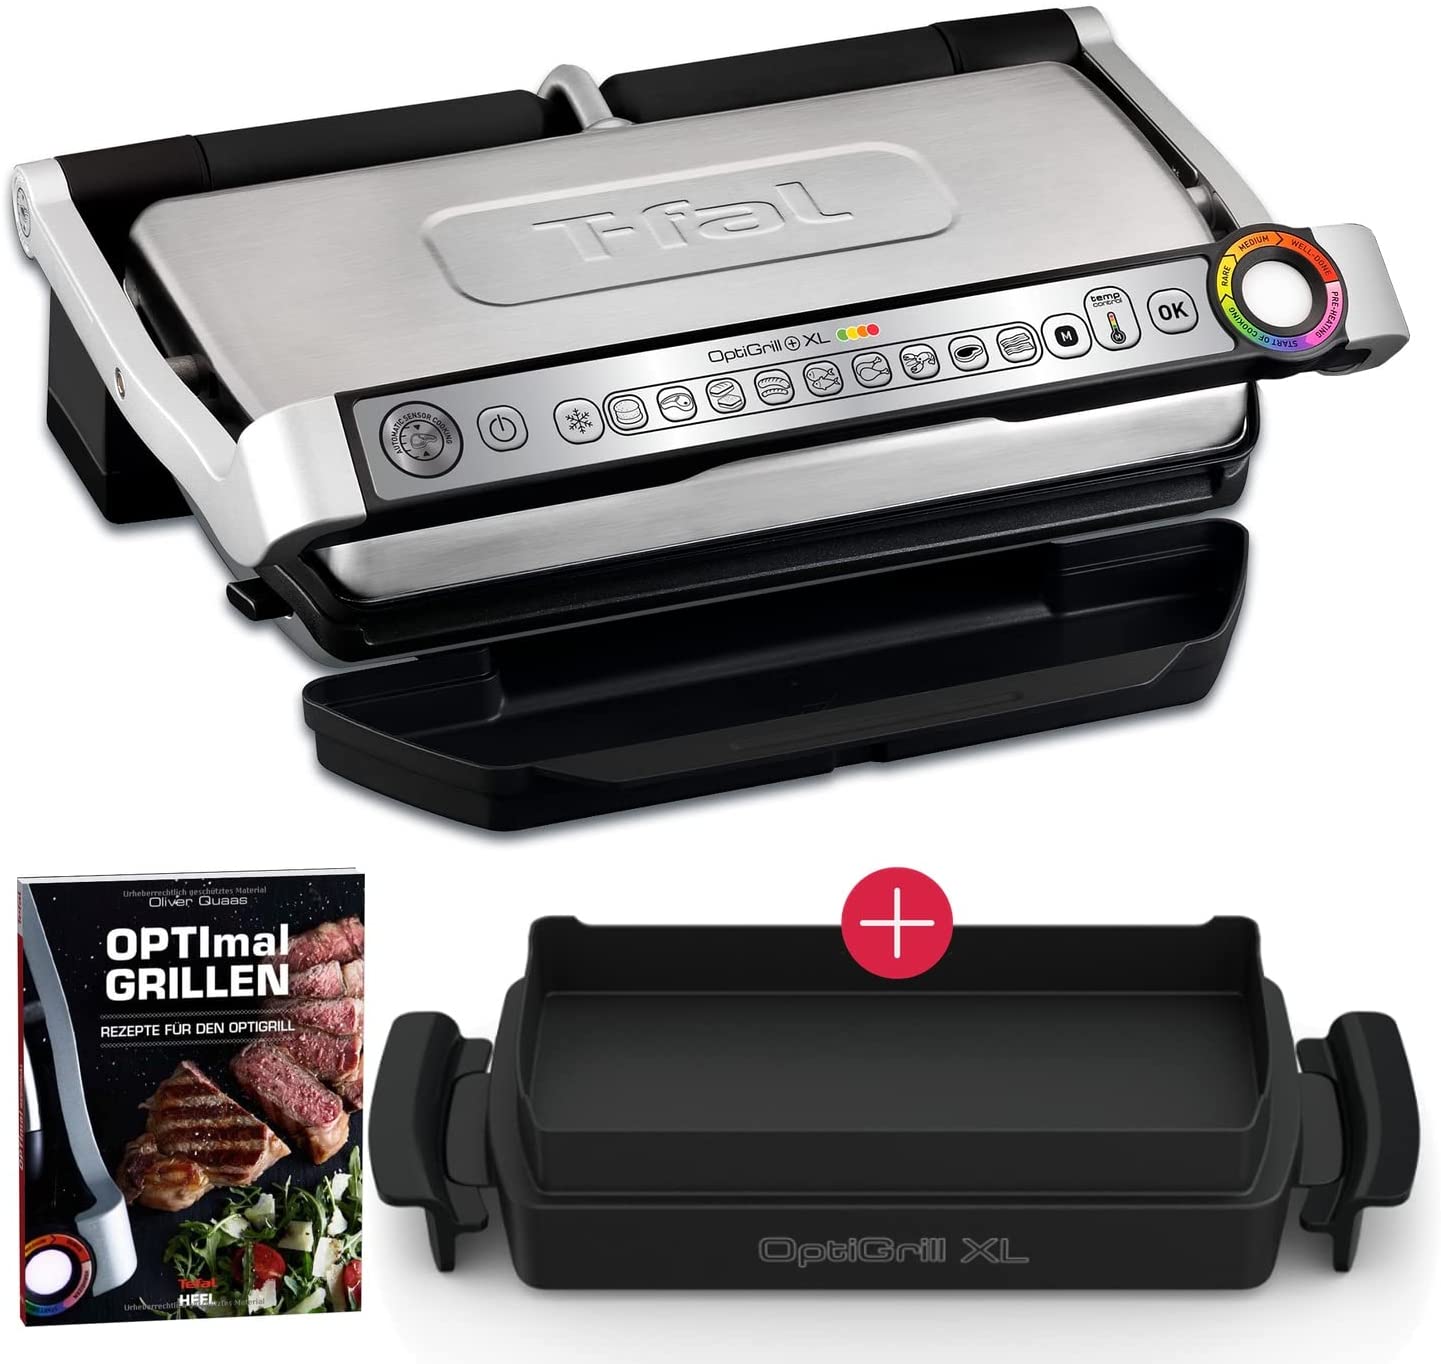 Tefal OptiGrill+ XL Electric Contact Grill + XA7268 Snacking & Baking Baking Tray + Recipe Book, 9 Automatic Programmes Indoor Electric Grill Ideal Grill Results Non-Stick Cast Aluminium Plates